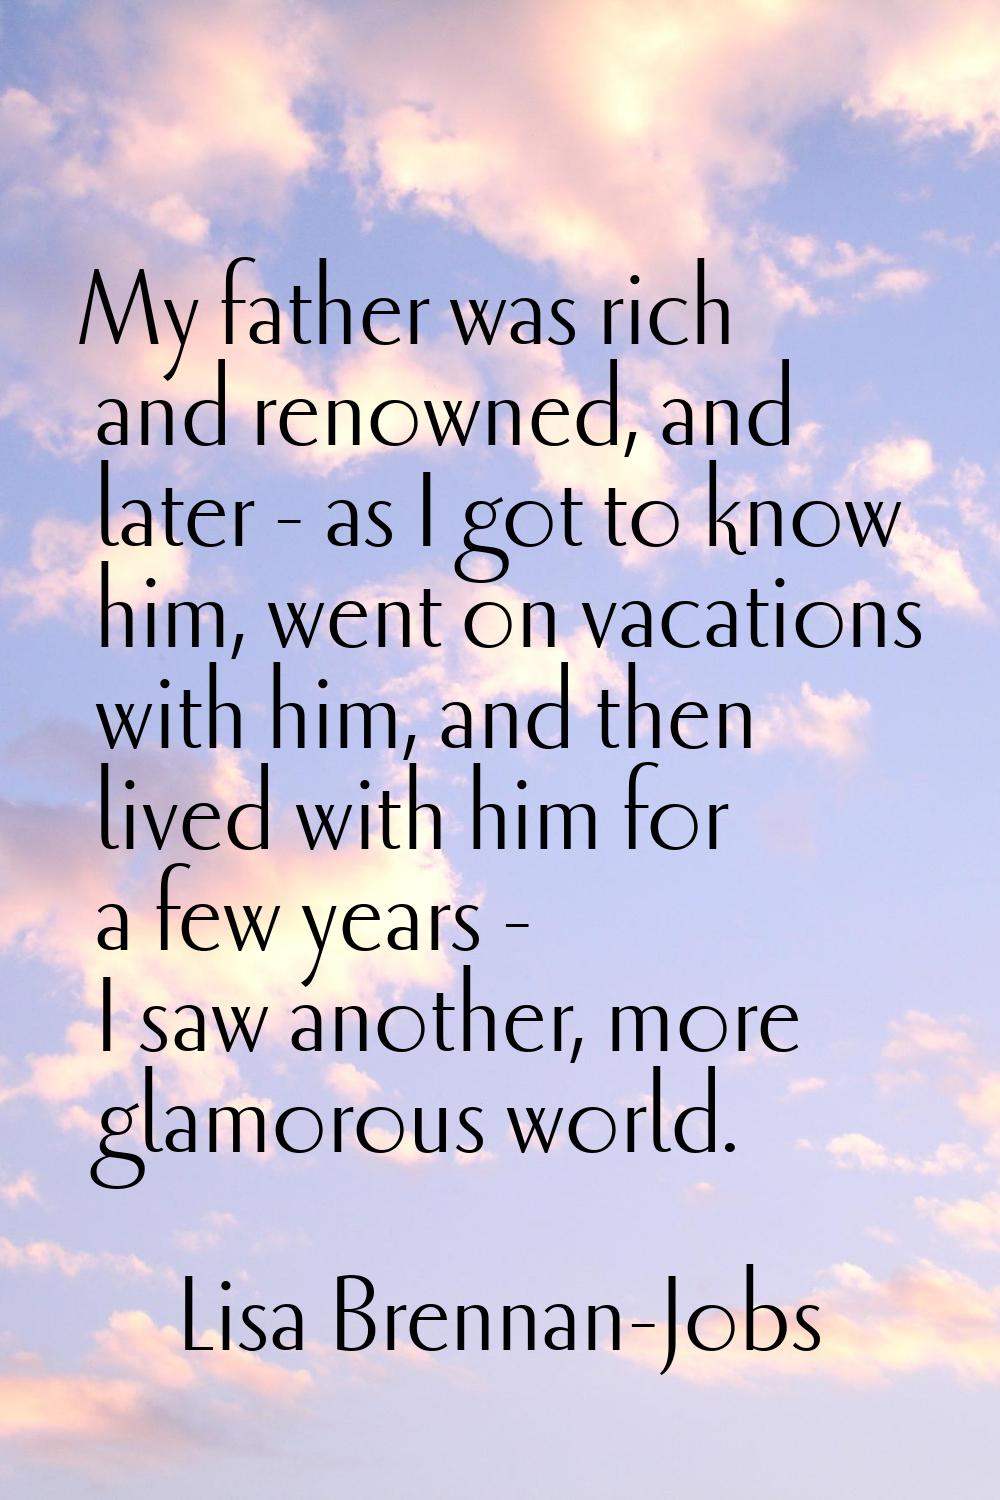 My father was rich and renowned, and later - as I got to know him, went on vacations with him, and 